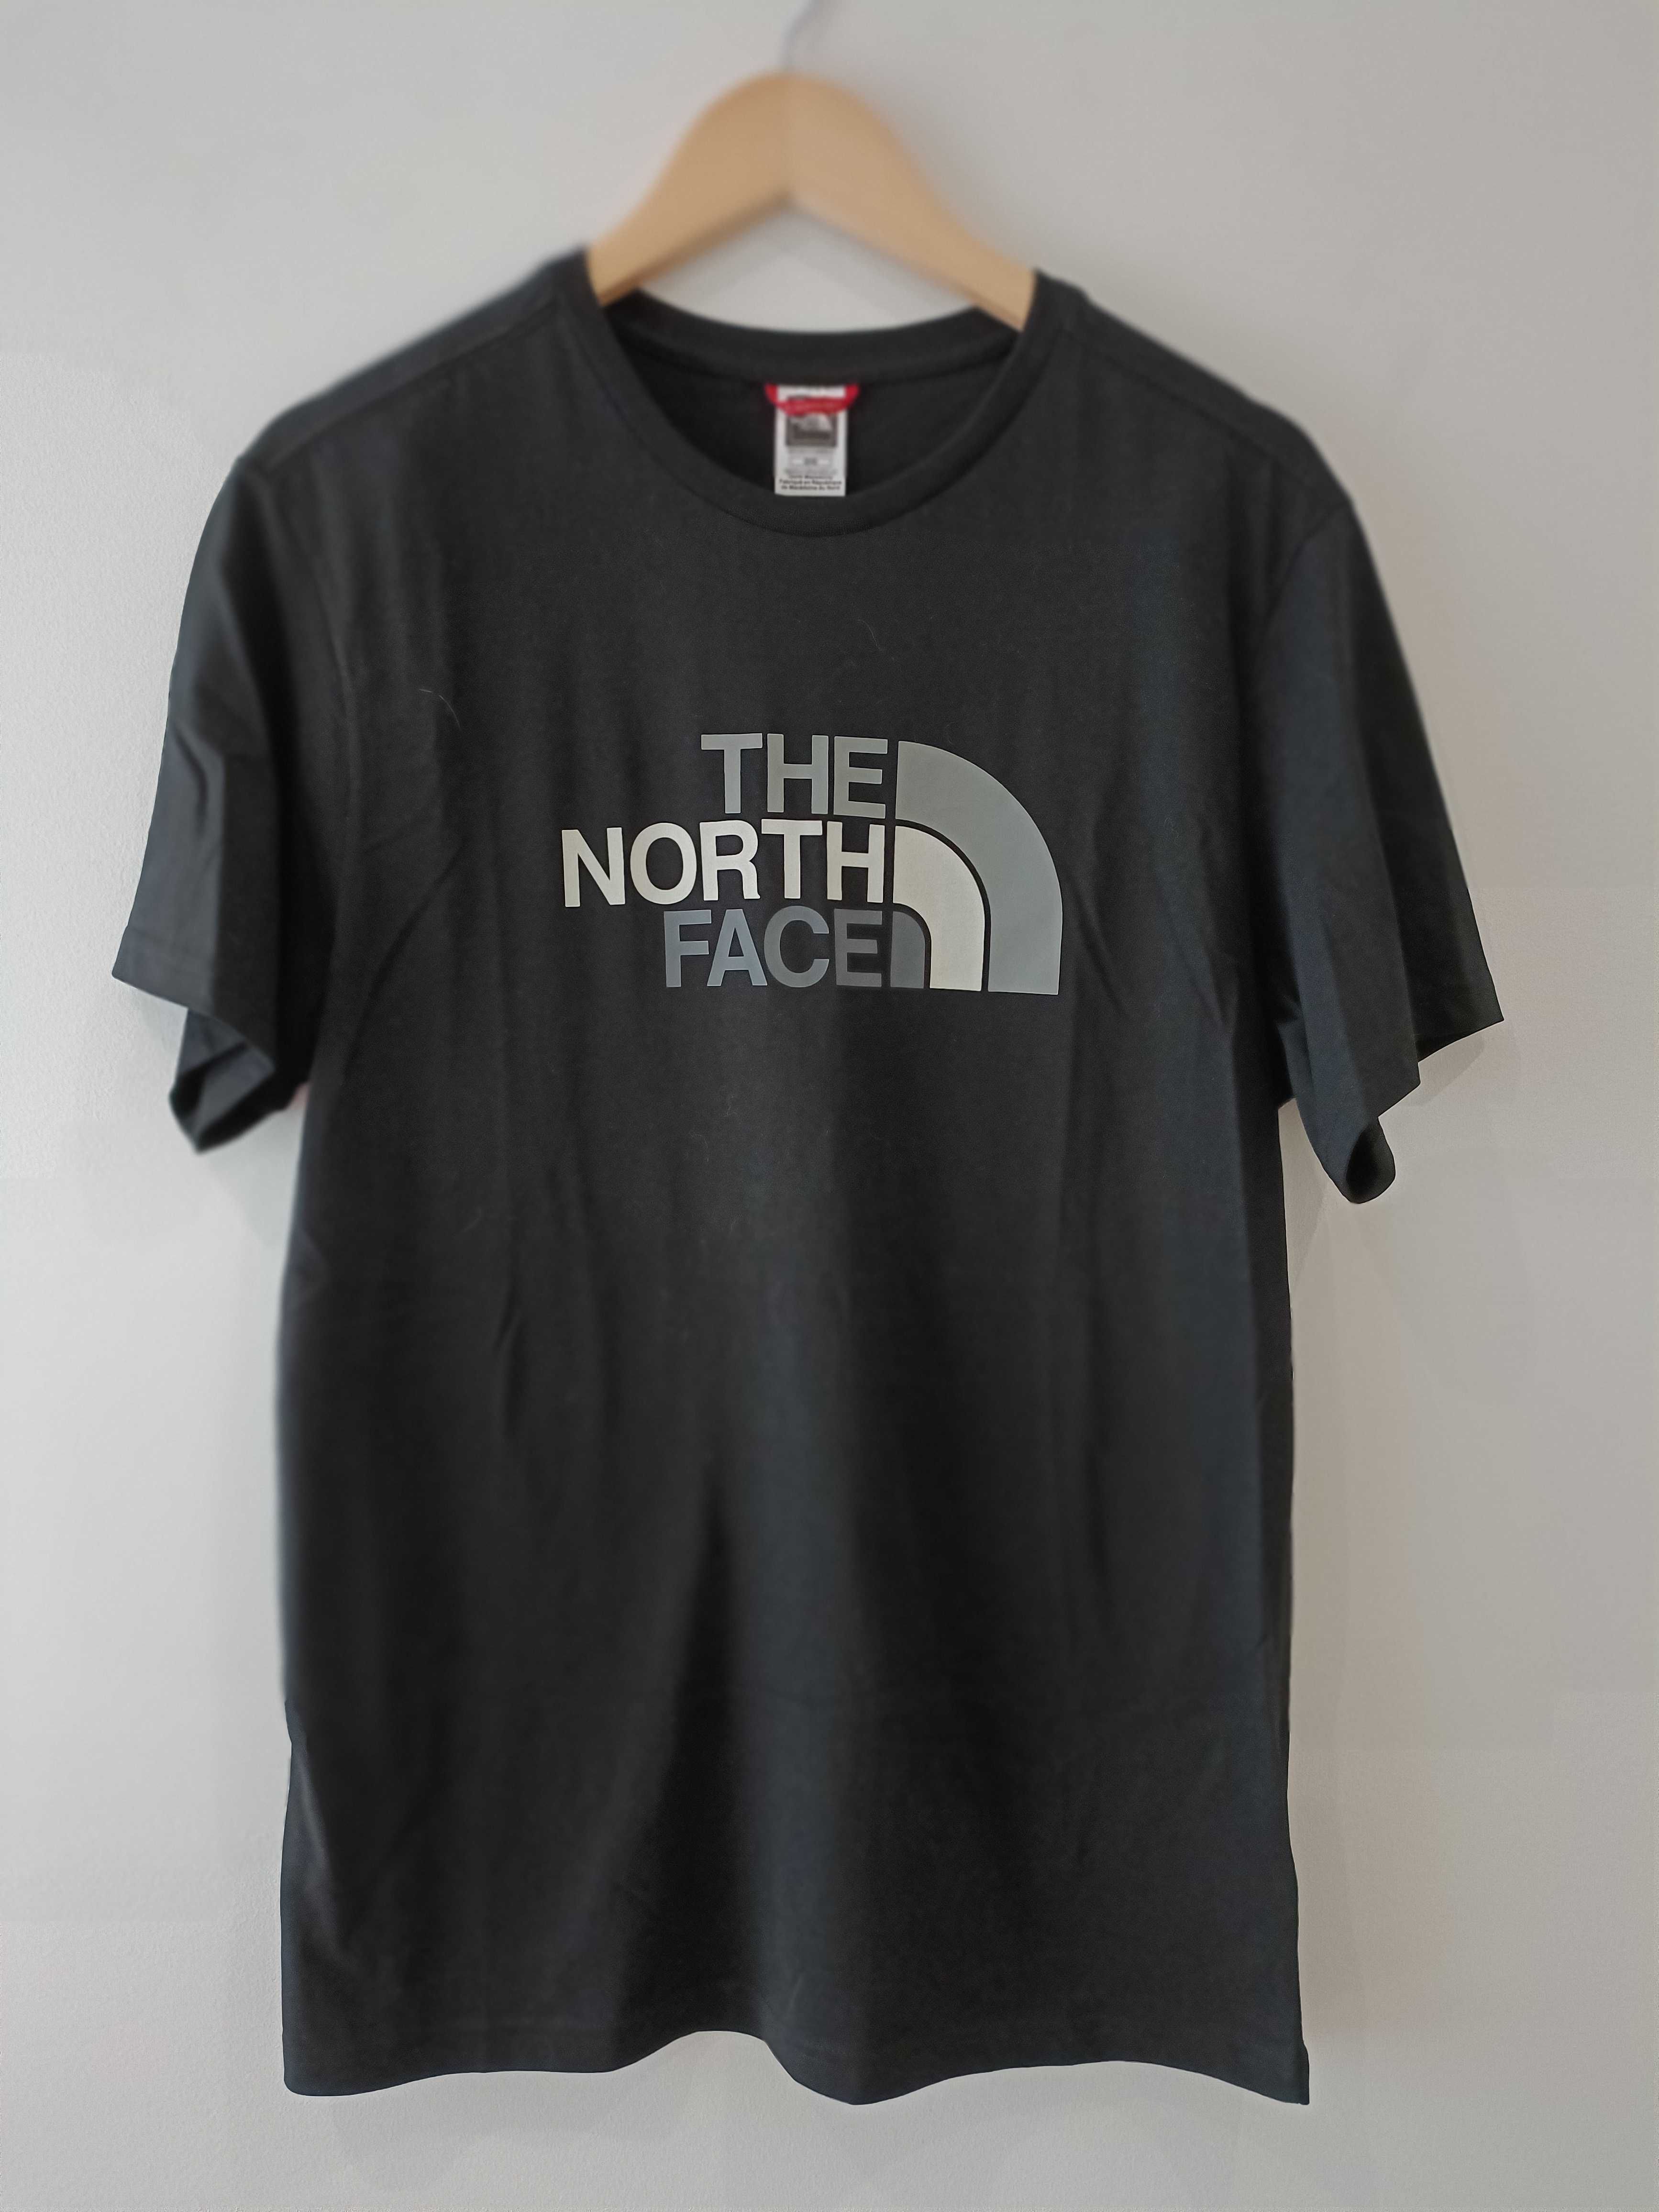 Tshirt the north face